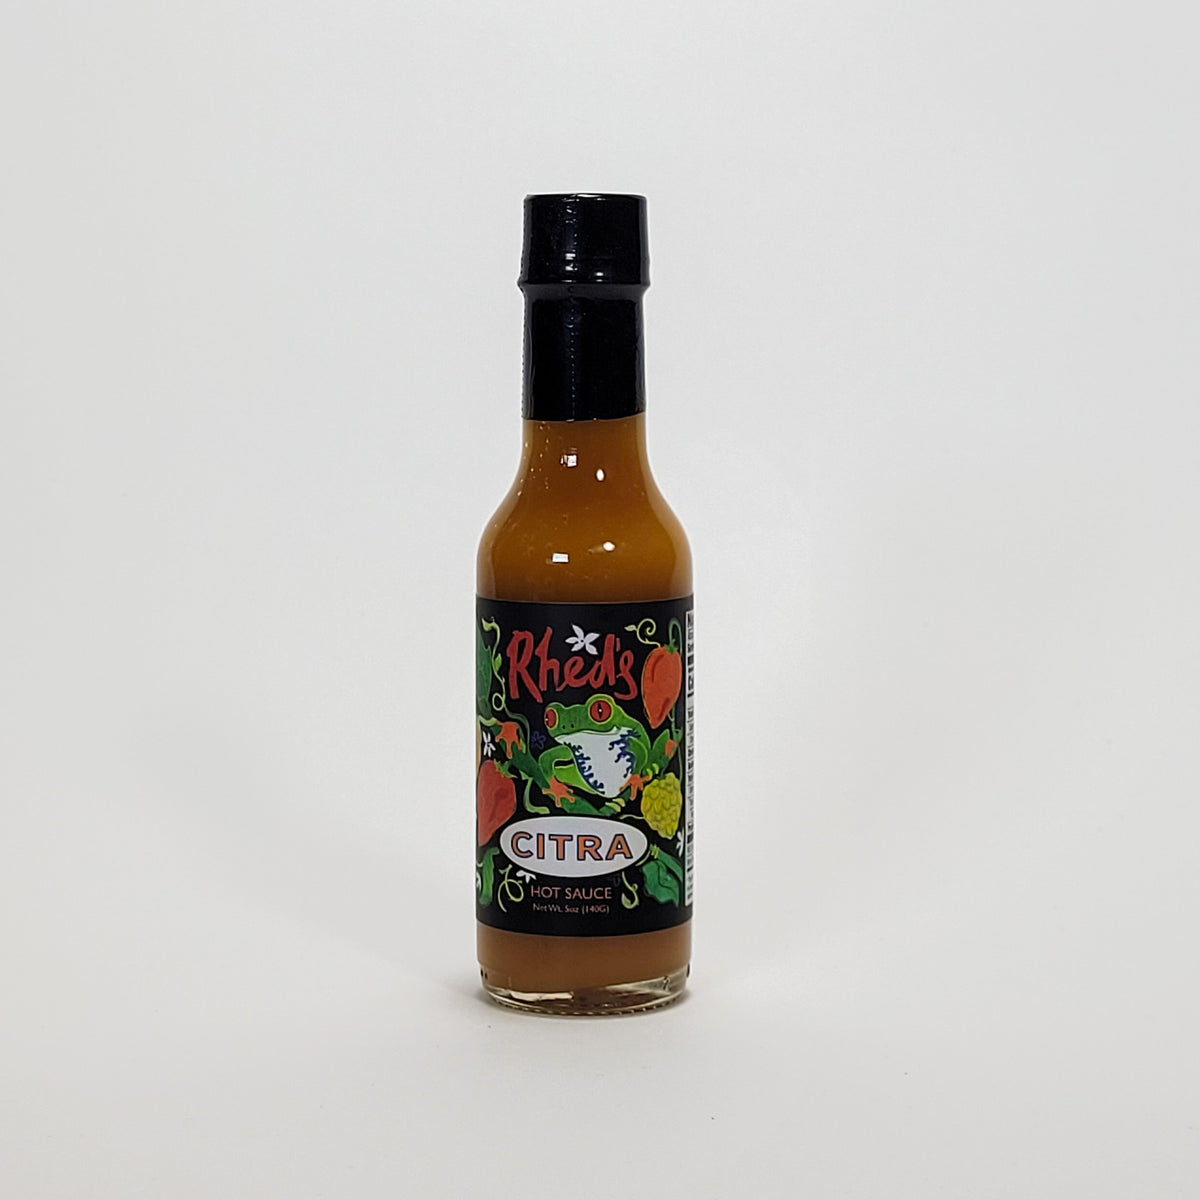 Rhed&#39;s Citra hot sauce